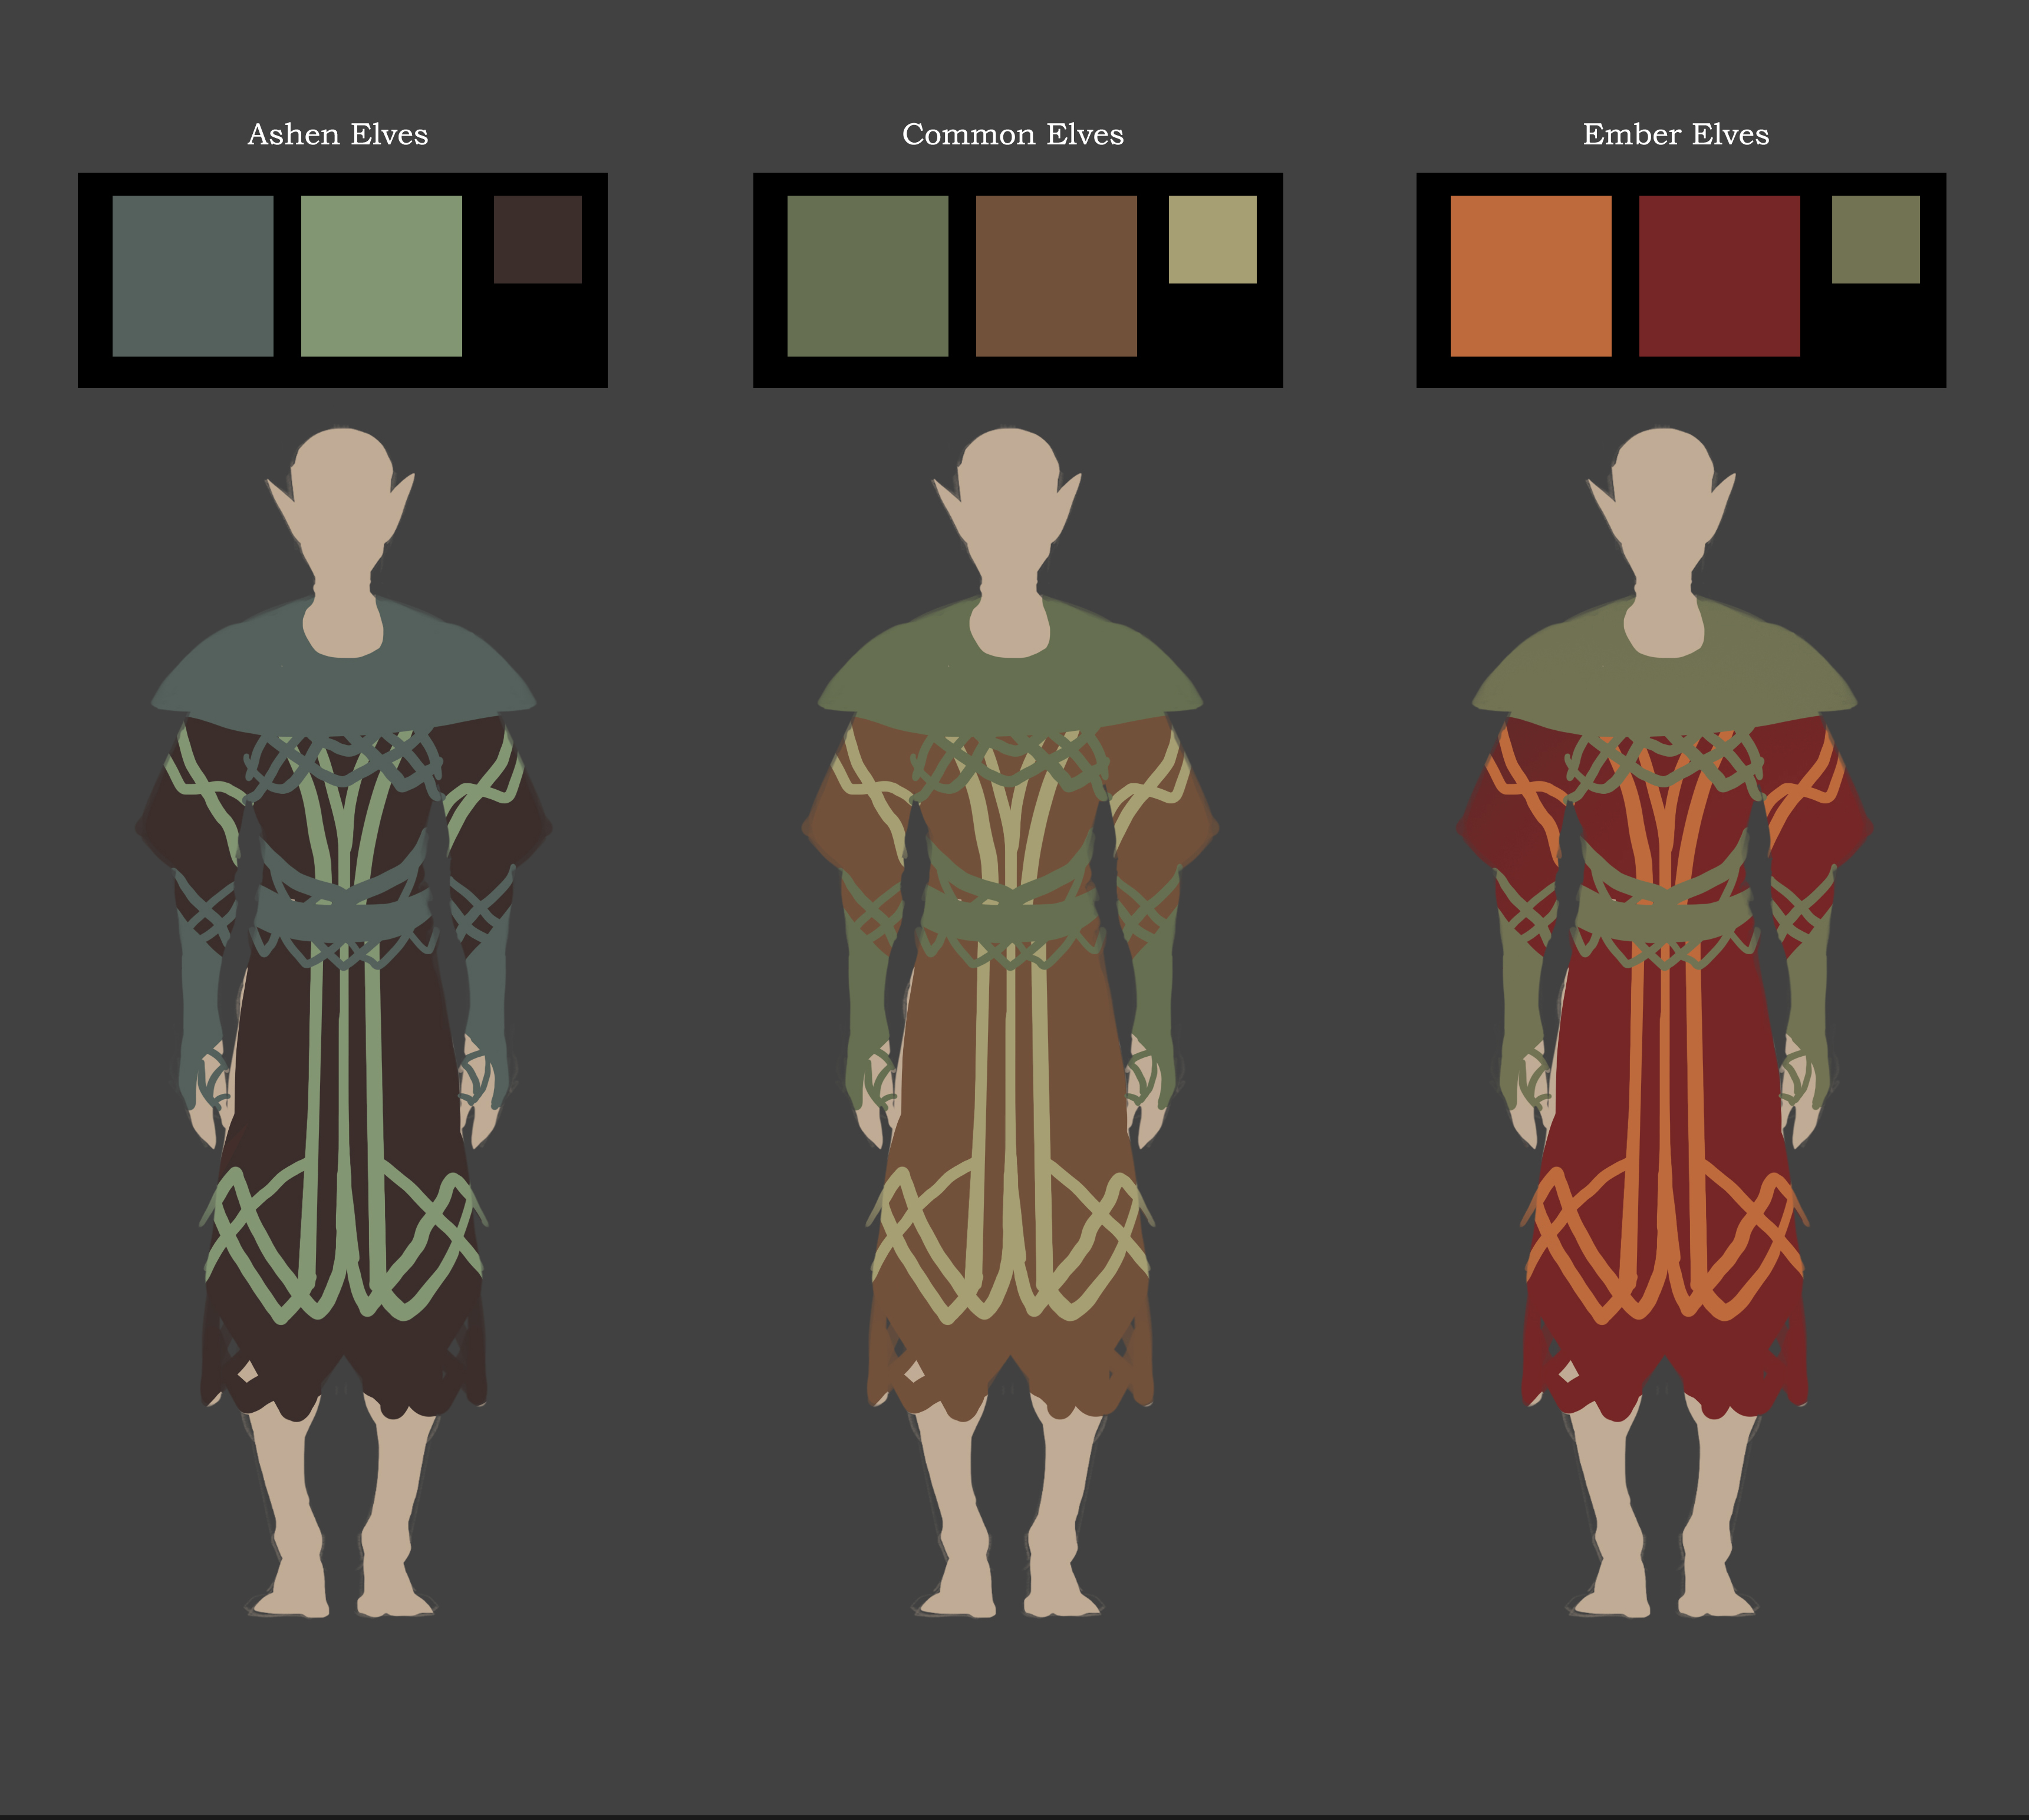 2018-Feb 14: concept art of color palettes for Ashen, Common, and Ember Elves